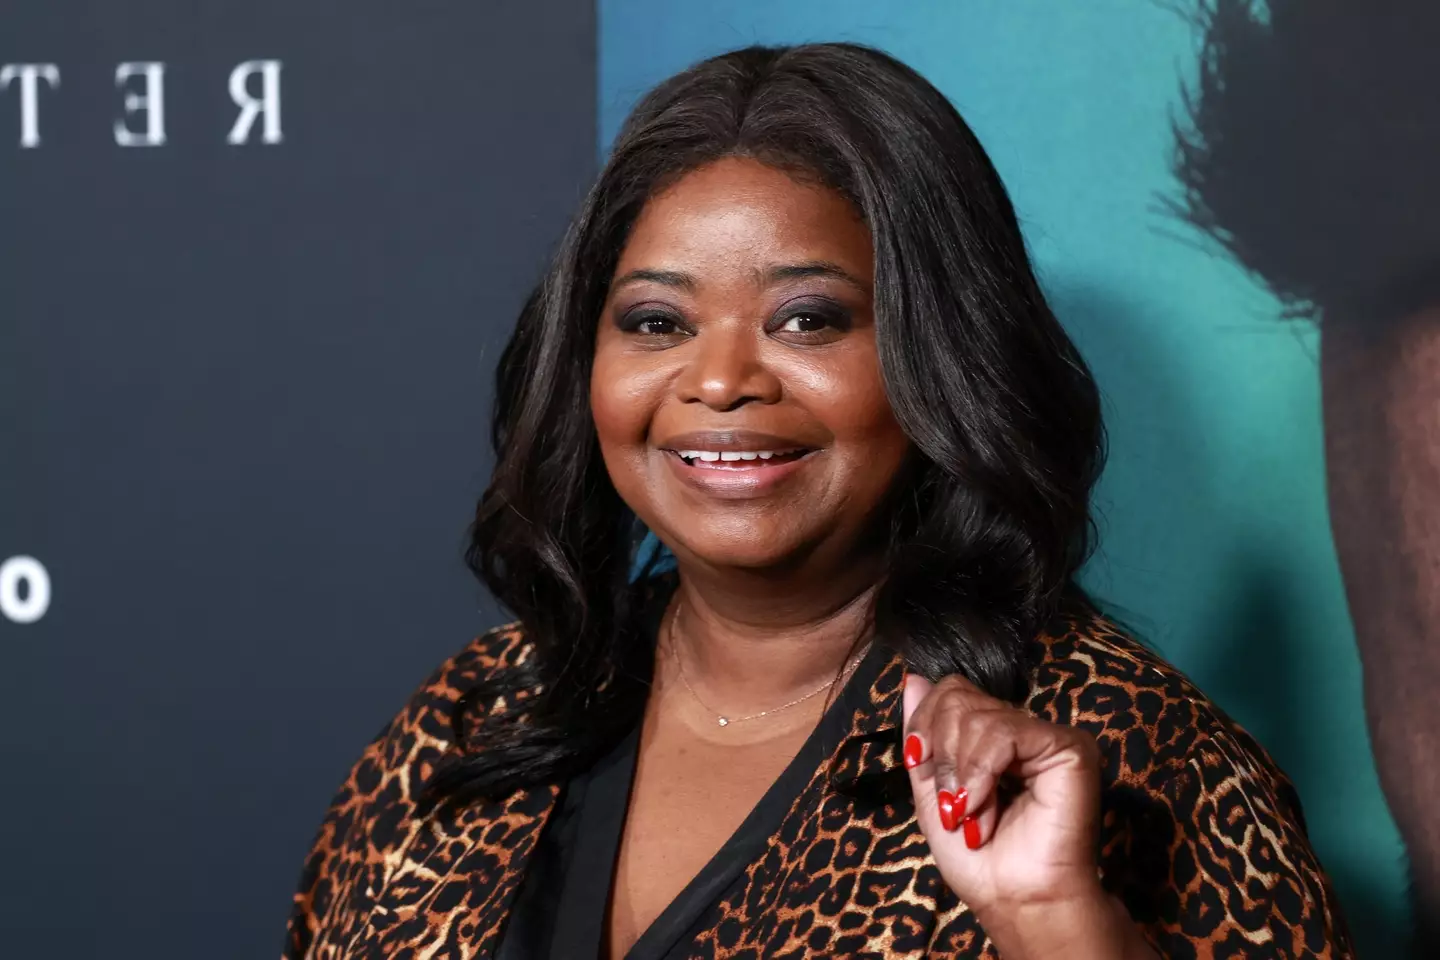 Octavia Spencer had five very specific words in response to Britney and Sam's wedding.